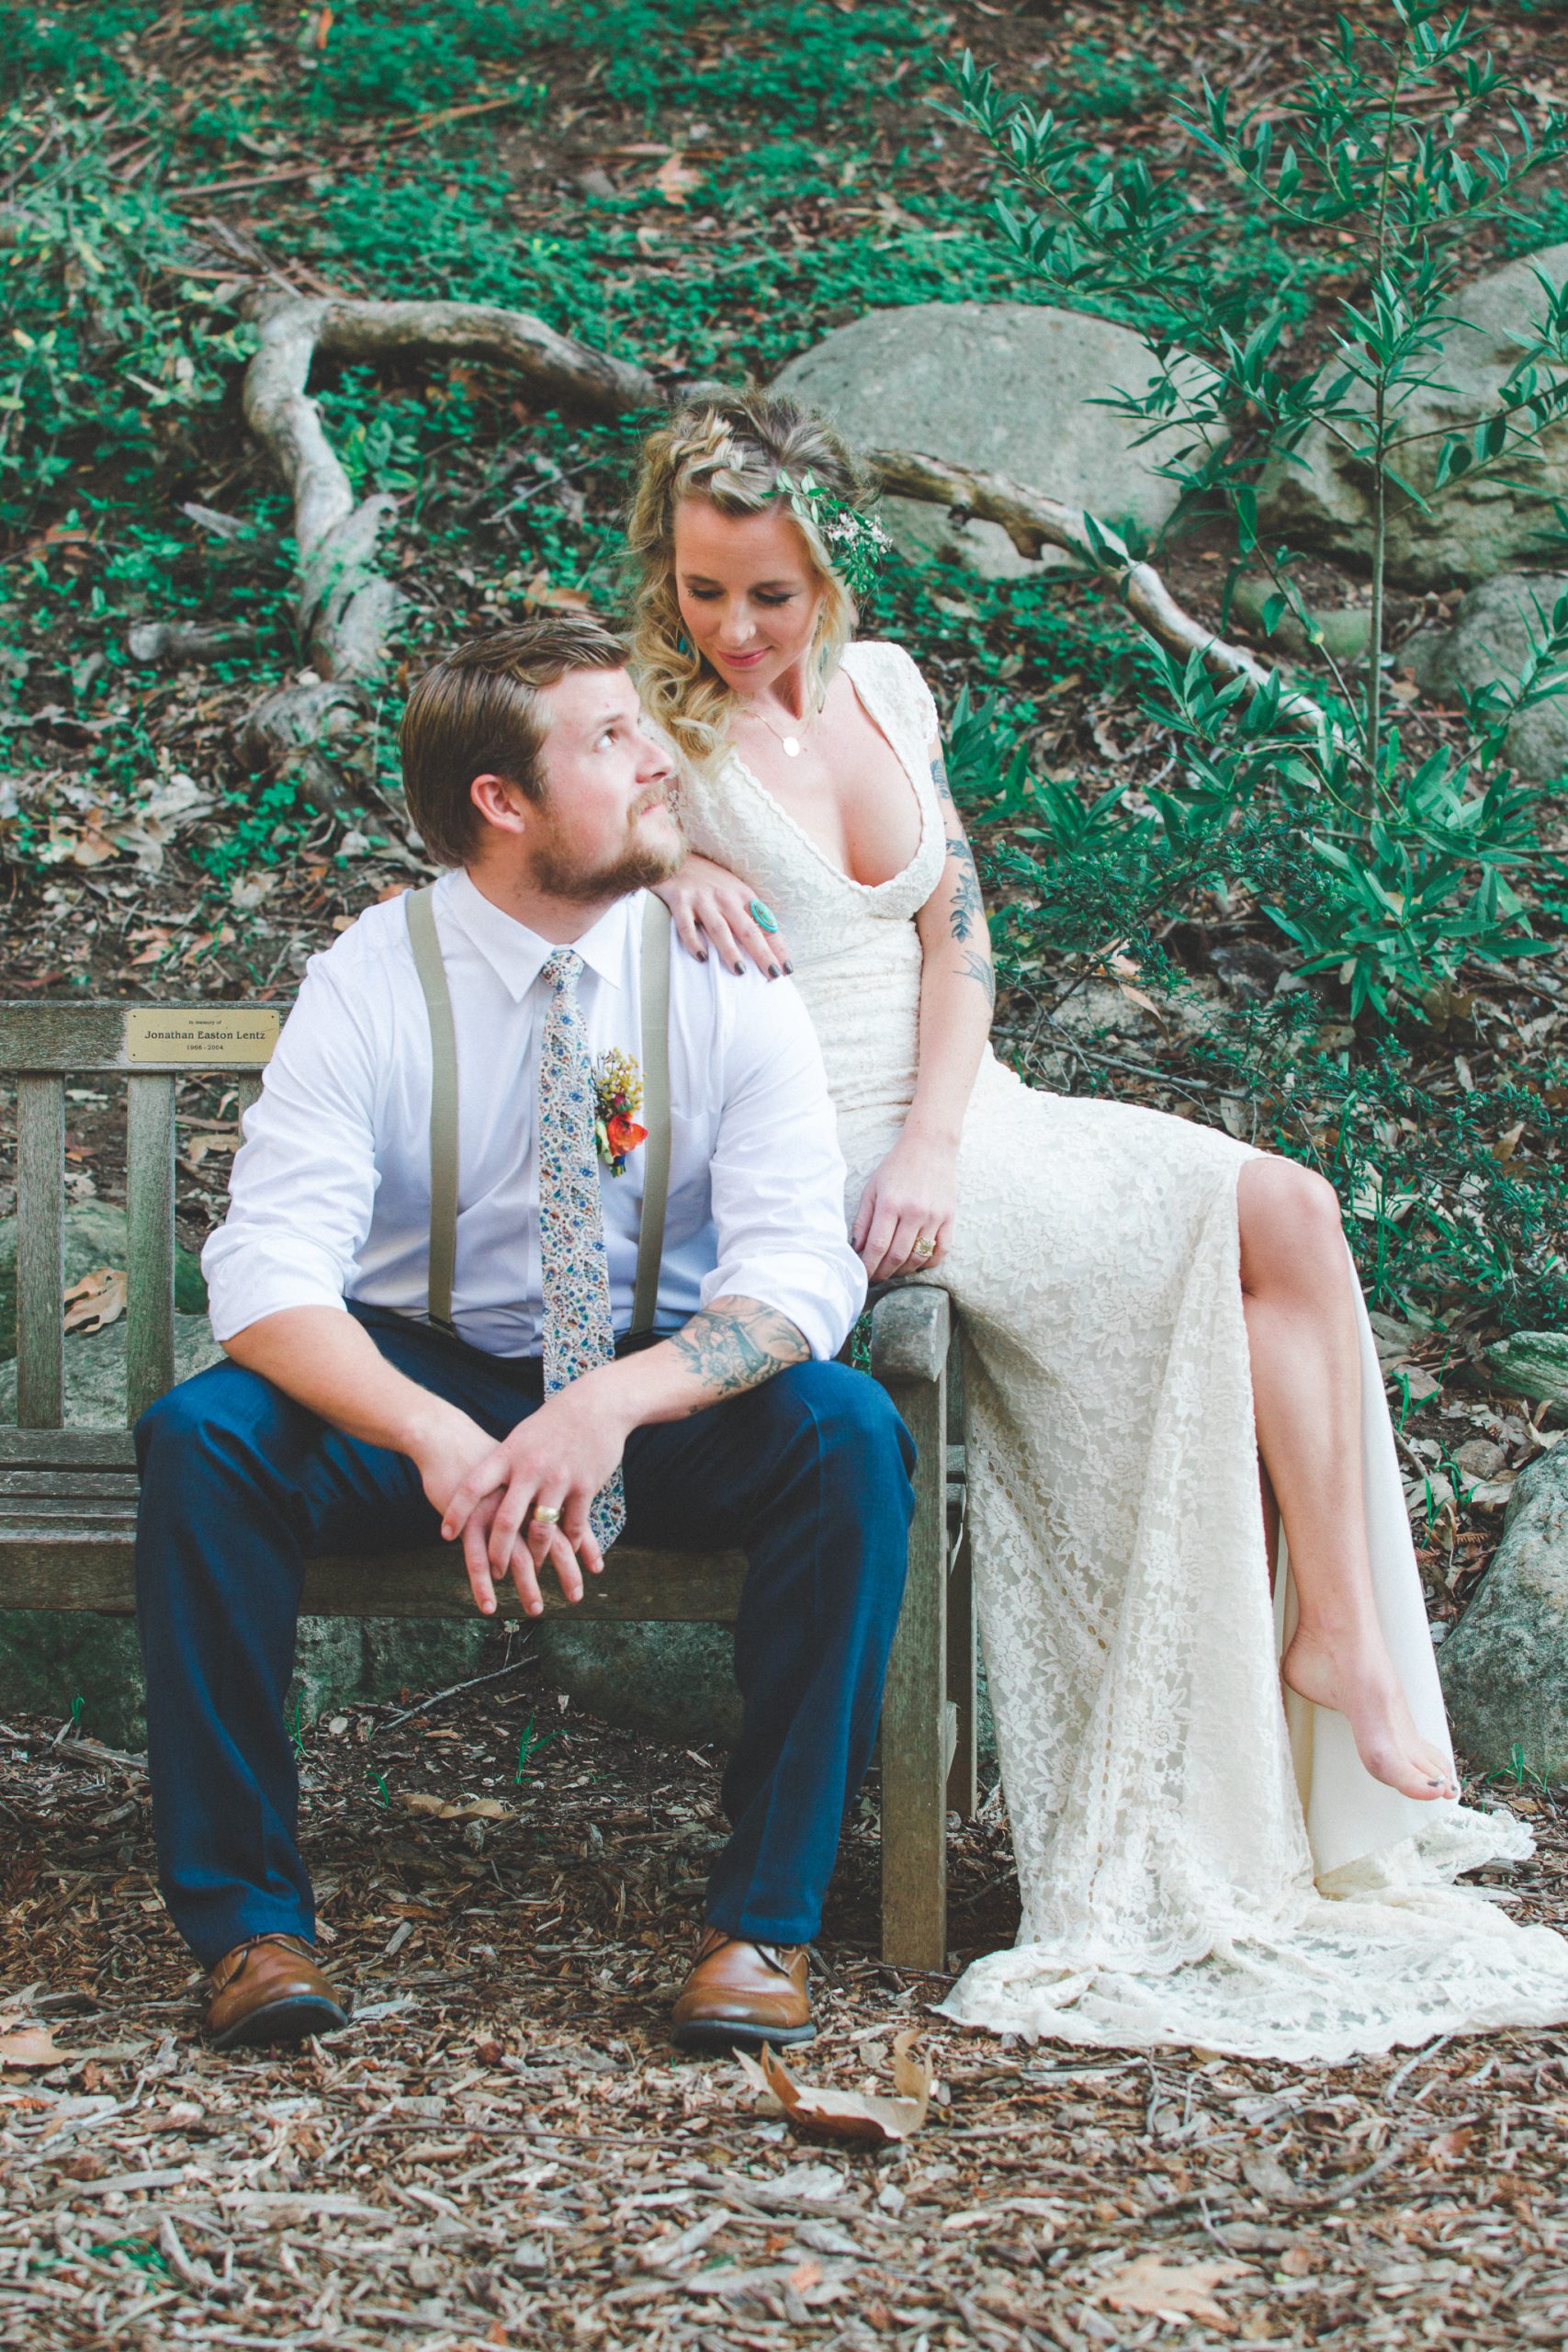 Vibrant and Eclectic Bohemian Wedding Editorial